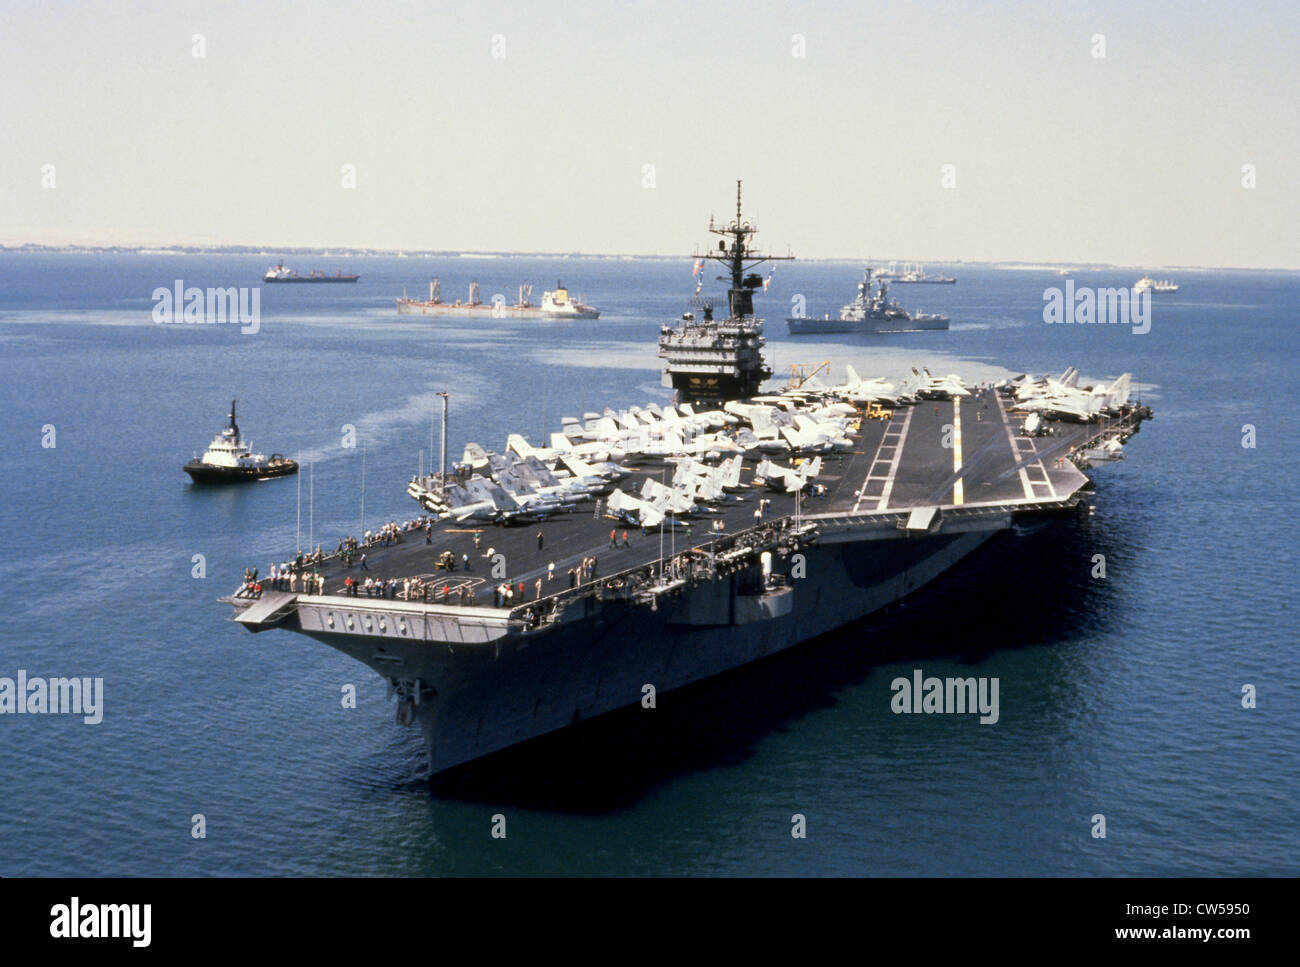 aircraft carrier uss john f kennedy sailing in the great